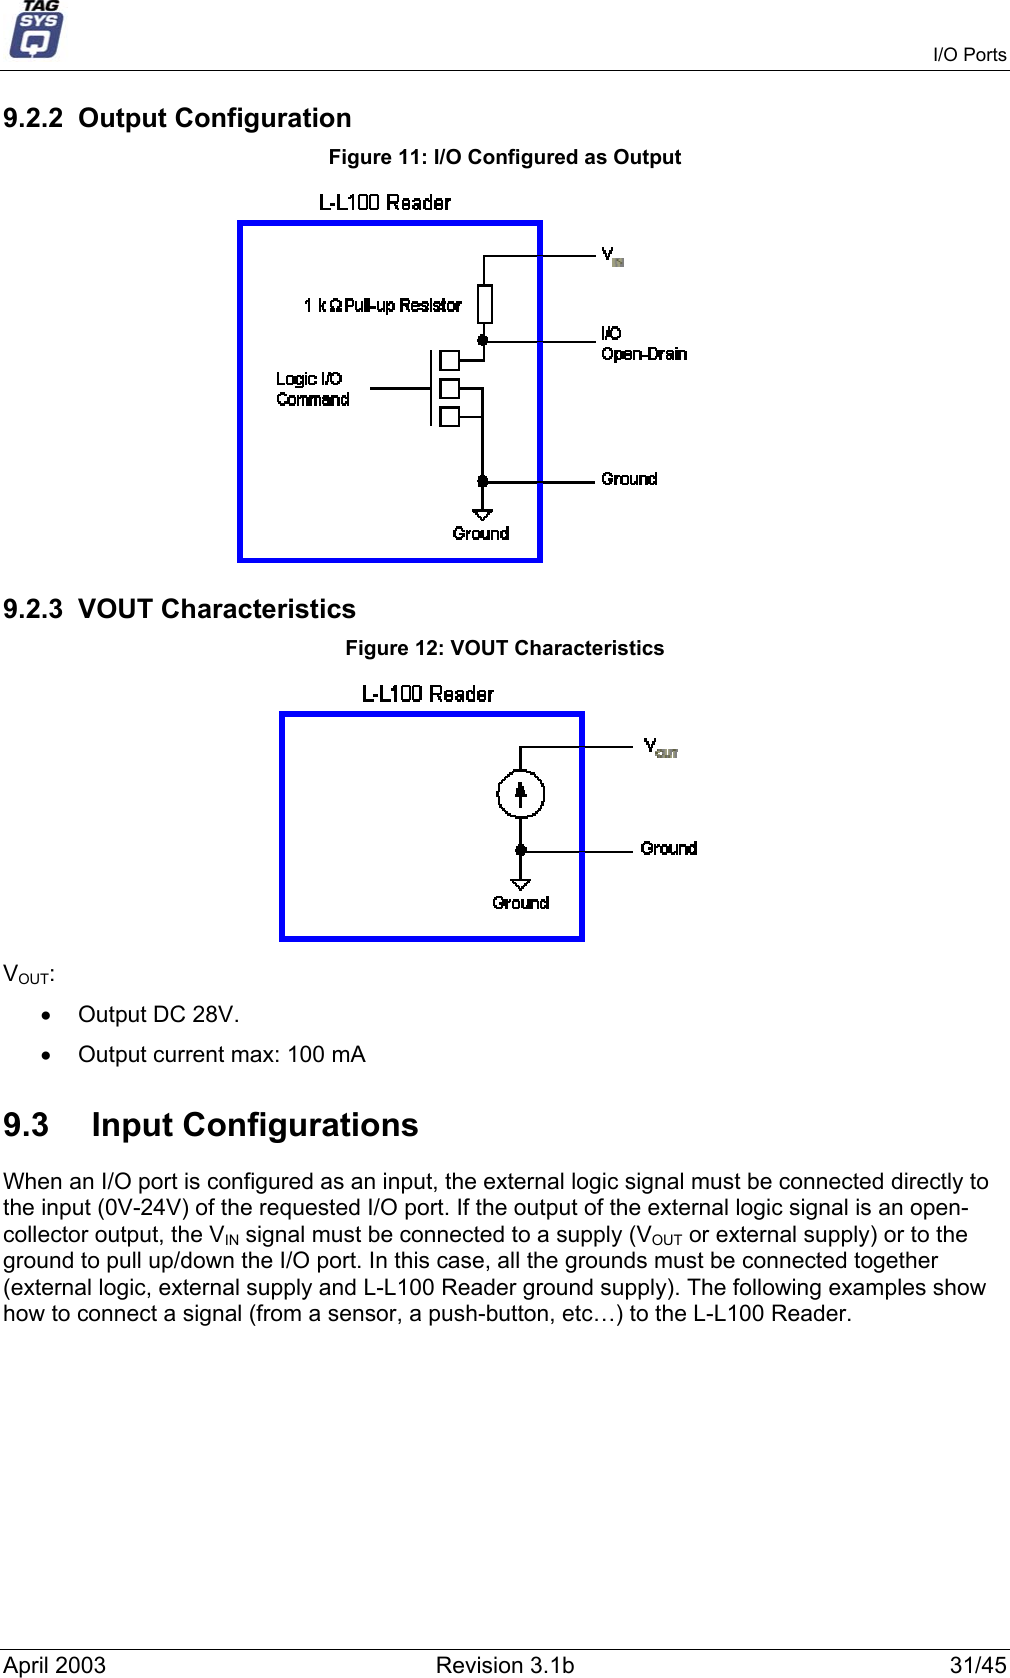   I/O Ports 9.2.2 Output Configuration Figure 11: I/O Configured as Output  9.2.3 VOUT Characteristics Figure 12: VOUT Characteristics  VOUT: •  Output DC 28V. •  Output current max: 100 mA 9.3 Input Configurations When an I/O port is configured as an input, the external logic signal must be connected directly to the input (0V-24V) of the requested I/O port. If the output of the external logic signal is an open-collector output, the VIN signal must be connected to a supply (VOUT or external supply) or to the ground to pull up/down the I/O port. In this case, all the grounds must be connected together (external logic, external supply and L-L100 Reader ground supply). The following examples show how to connect a signal (from a sensor, a push-button, etc…) to the L-L100 Reader. April 2003  Revision 3.1b  31/45 